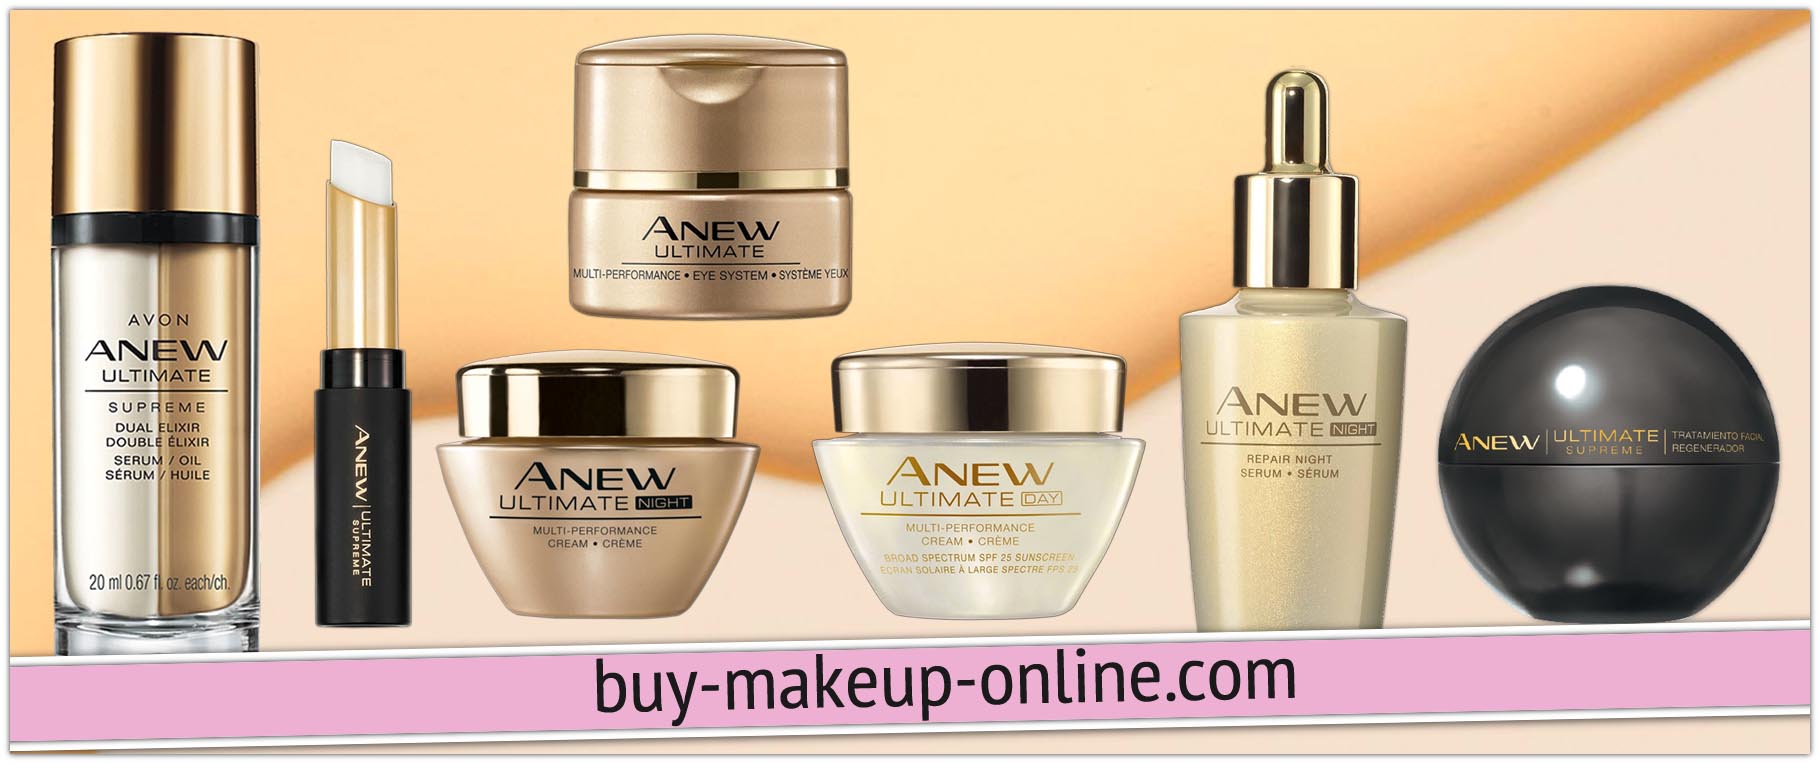 AVON Anew Ultimate 